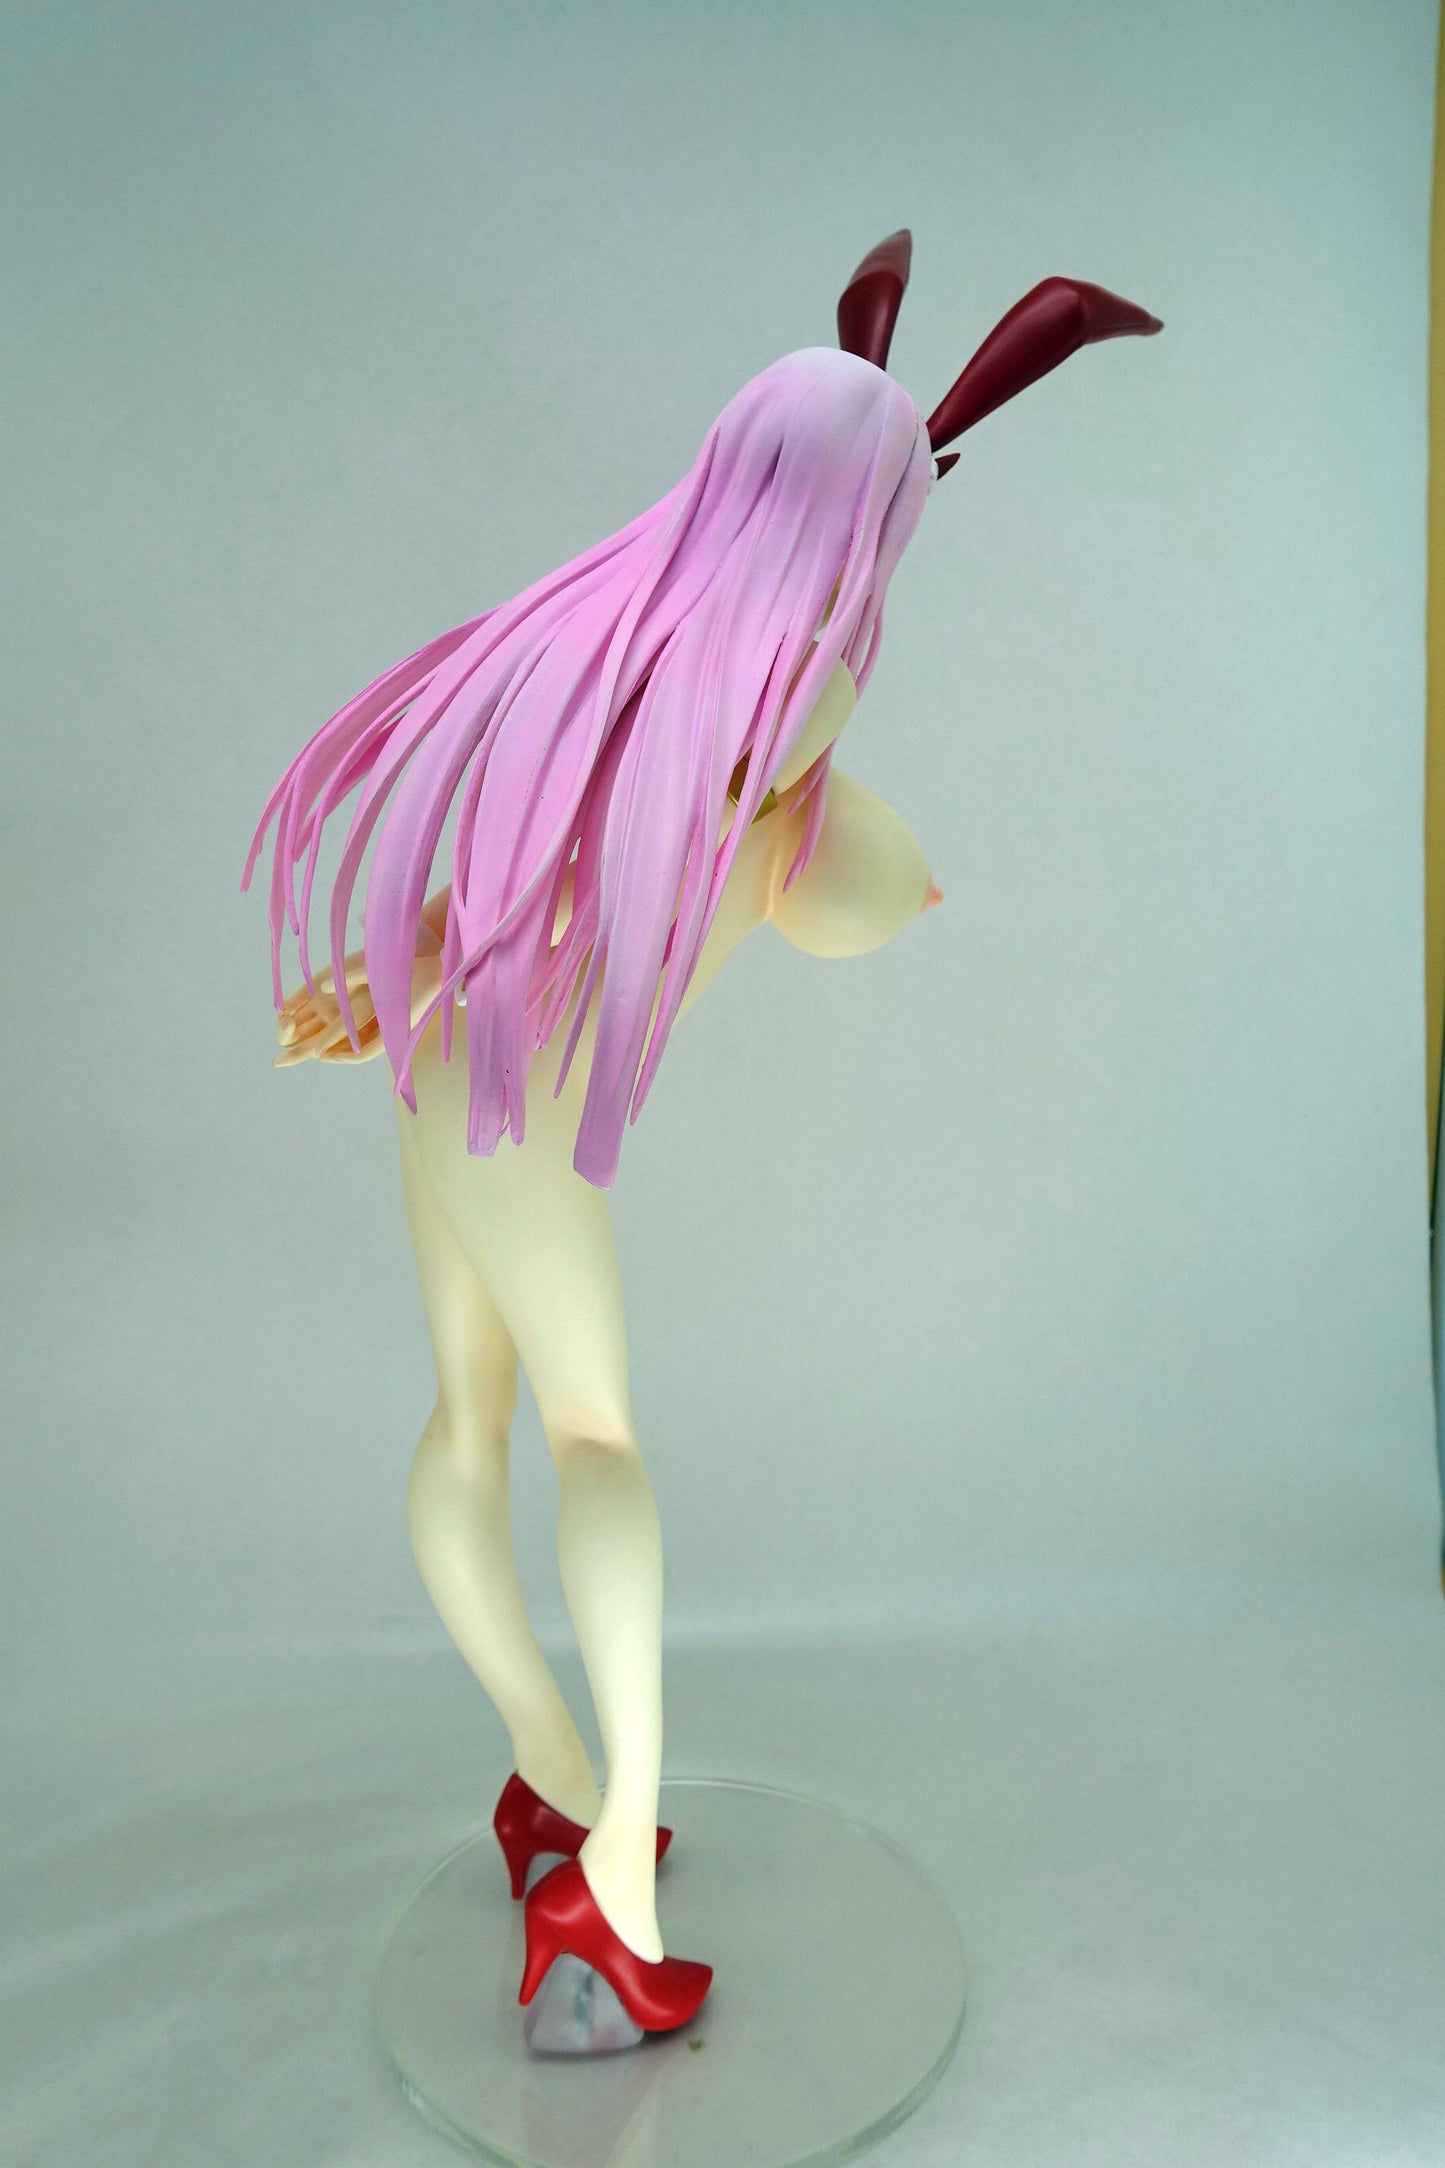 Darling In Frankxx Zero Two Bunny Girl 1/4 naked anime figures sexy collectible action figures